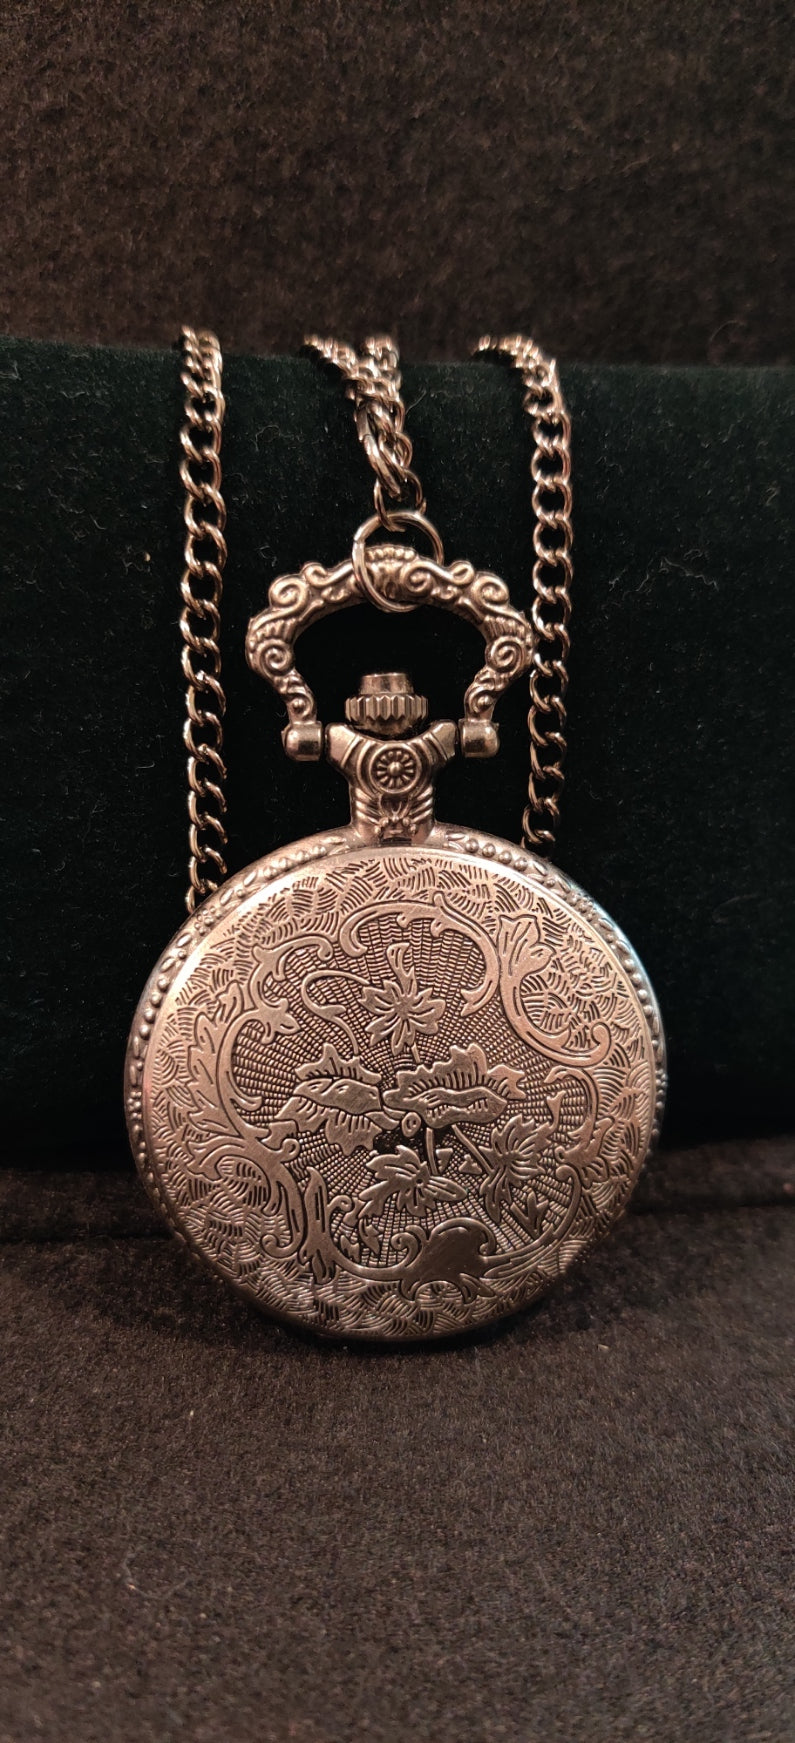 Game of Thrones Pocket Watch